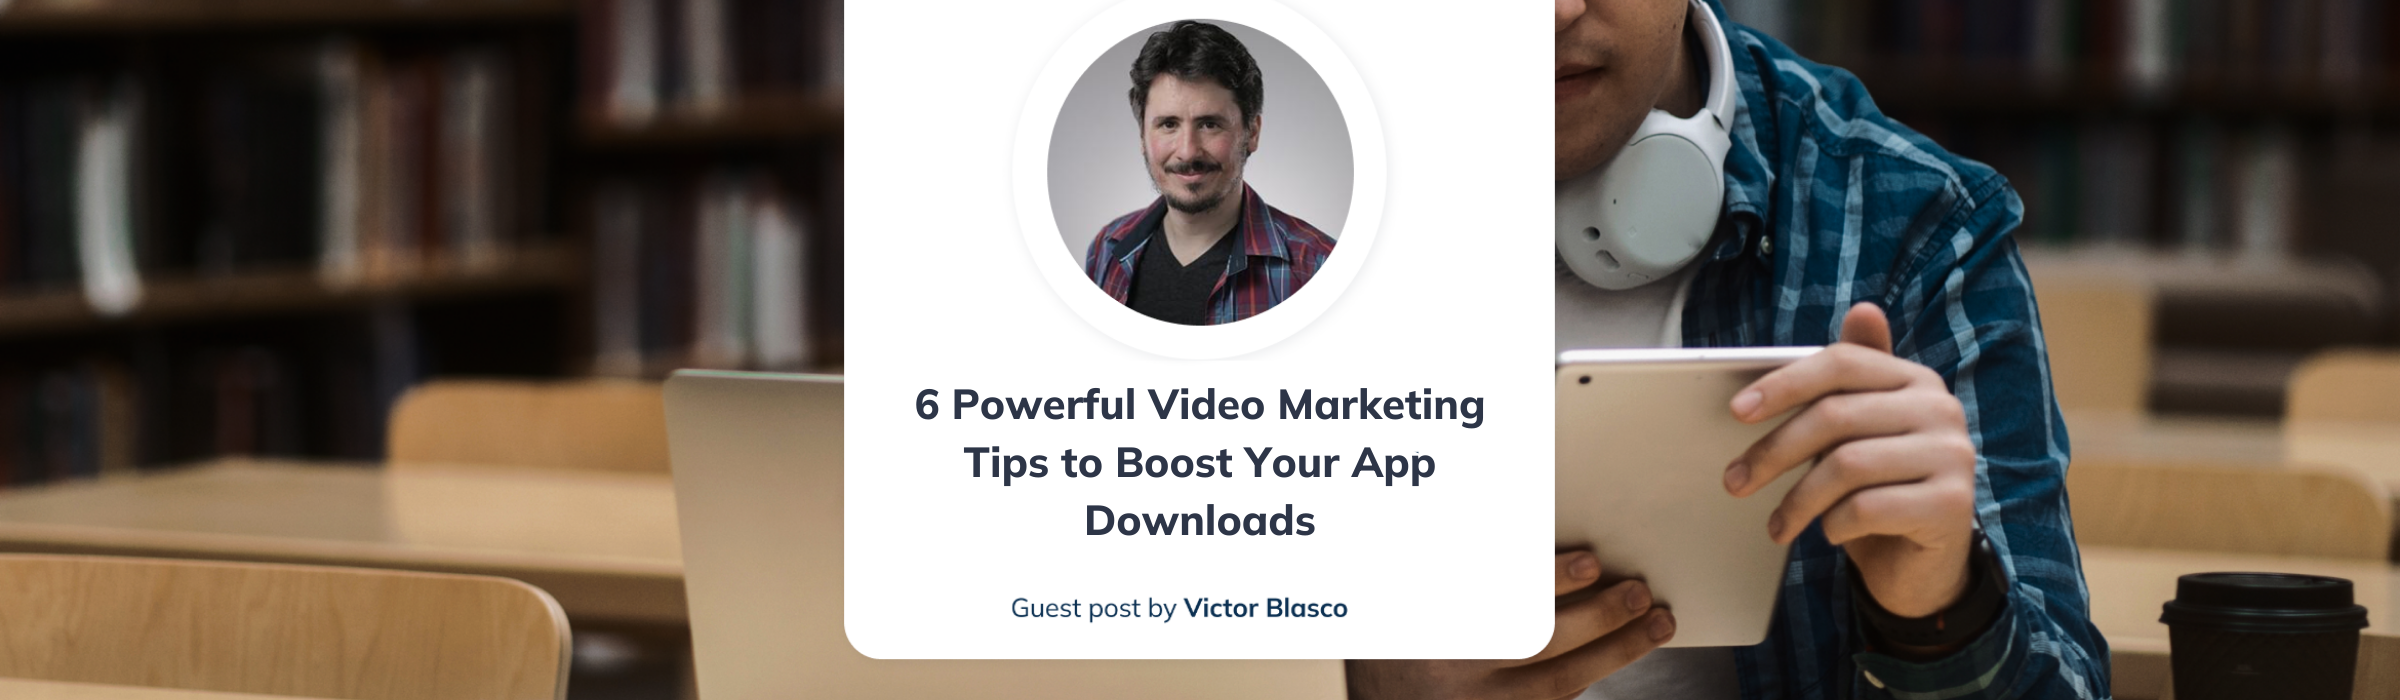 Boost your app downlaods with powerful Video Marketing